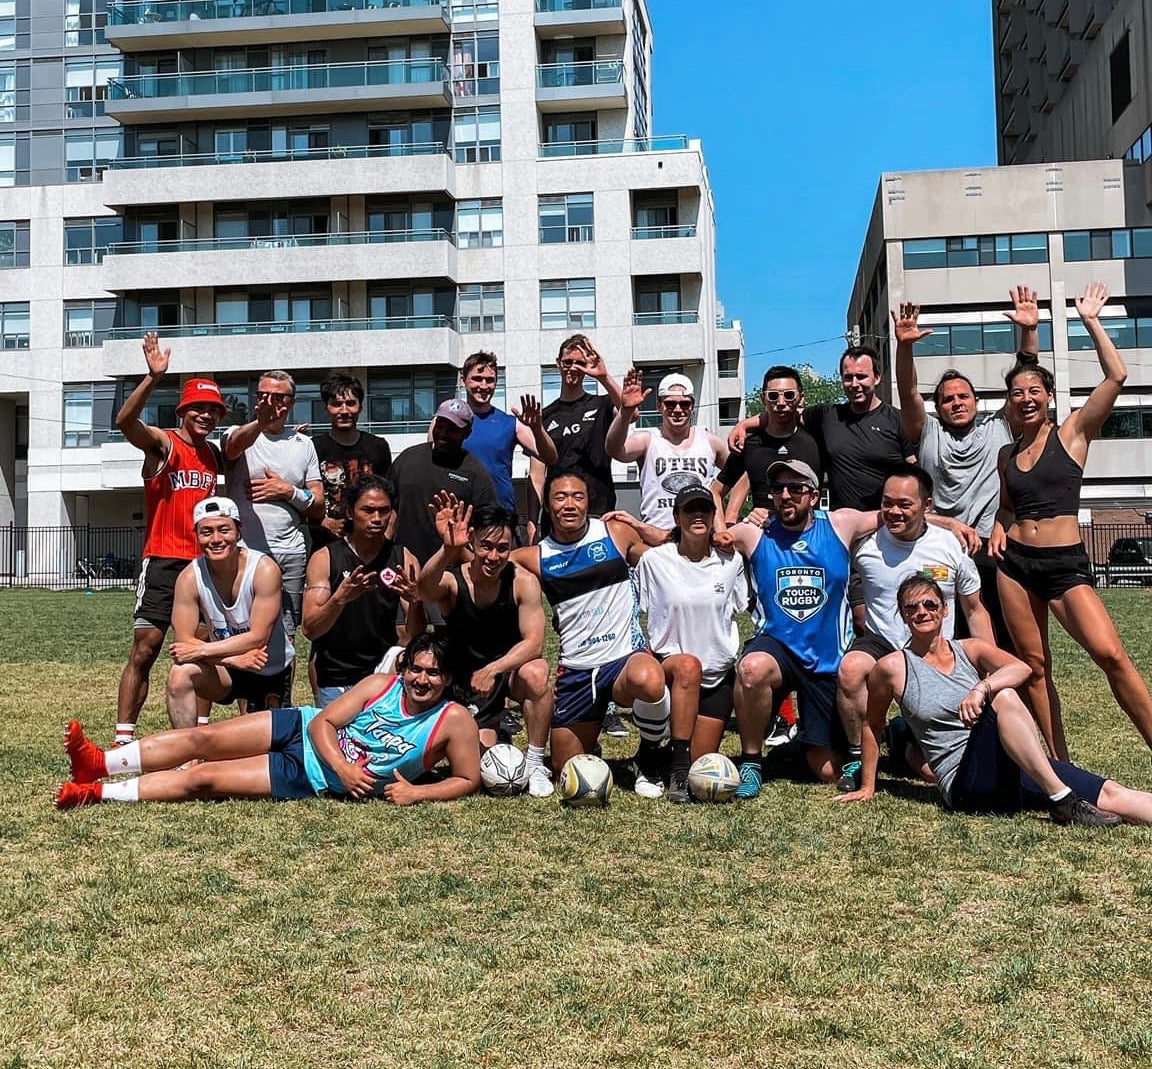 Pickup Touch rugby in Toronto - Touch rugby downtown Toronto for free & Leagues